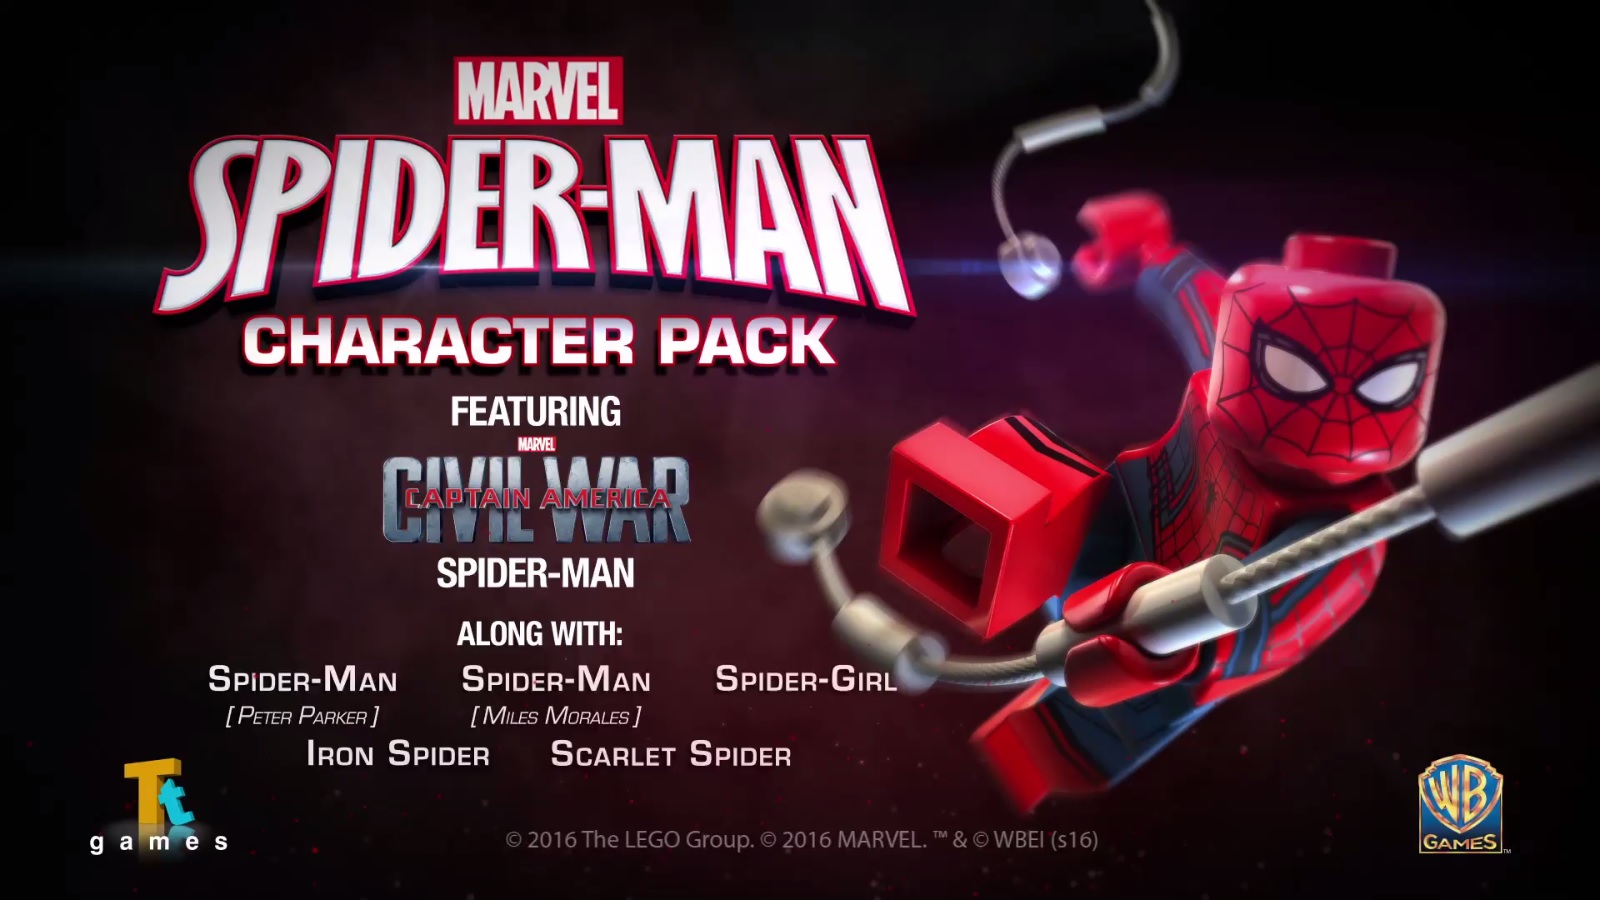 Video: Another look at the Spider-Man Character Pack in LEGO Marvel's  Avengers